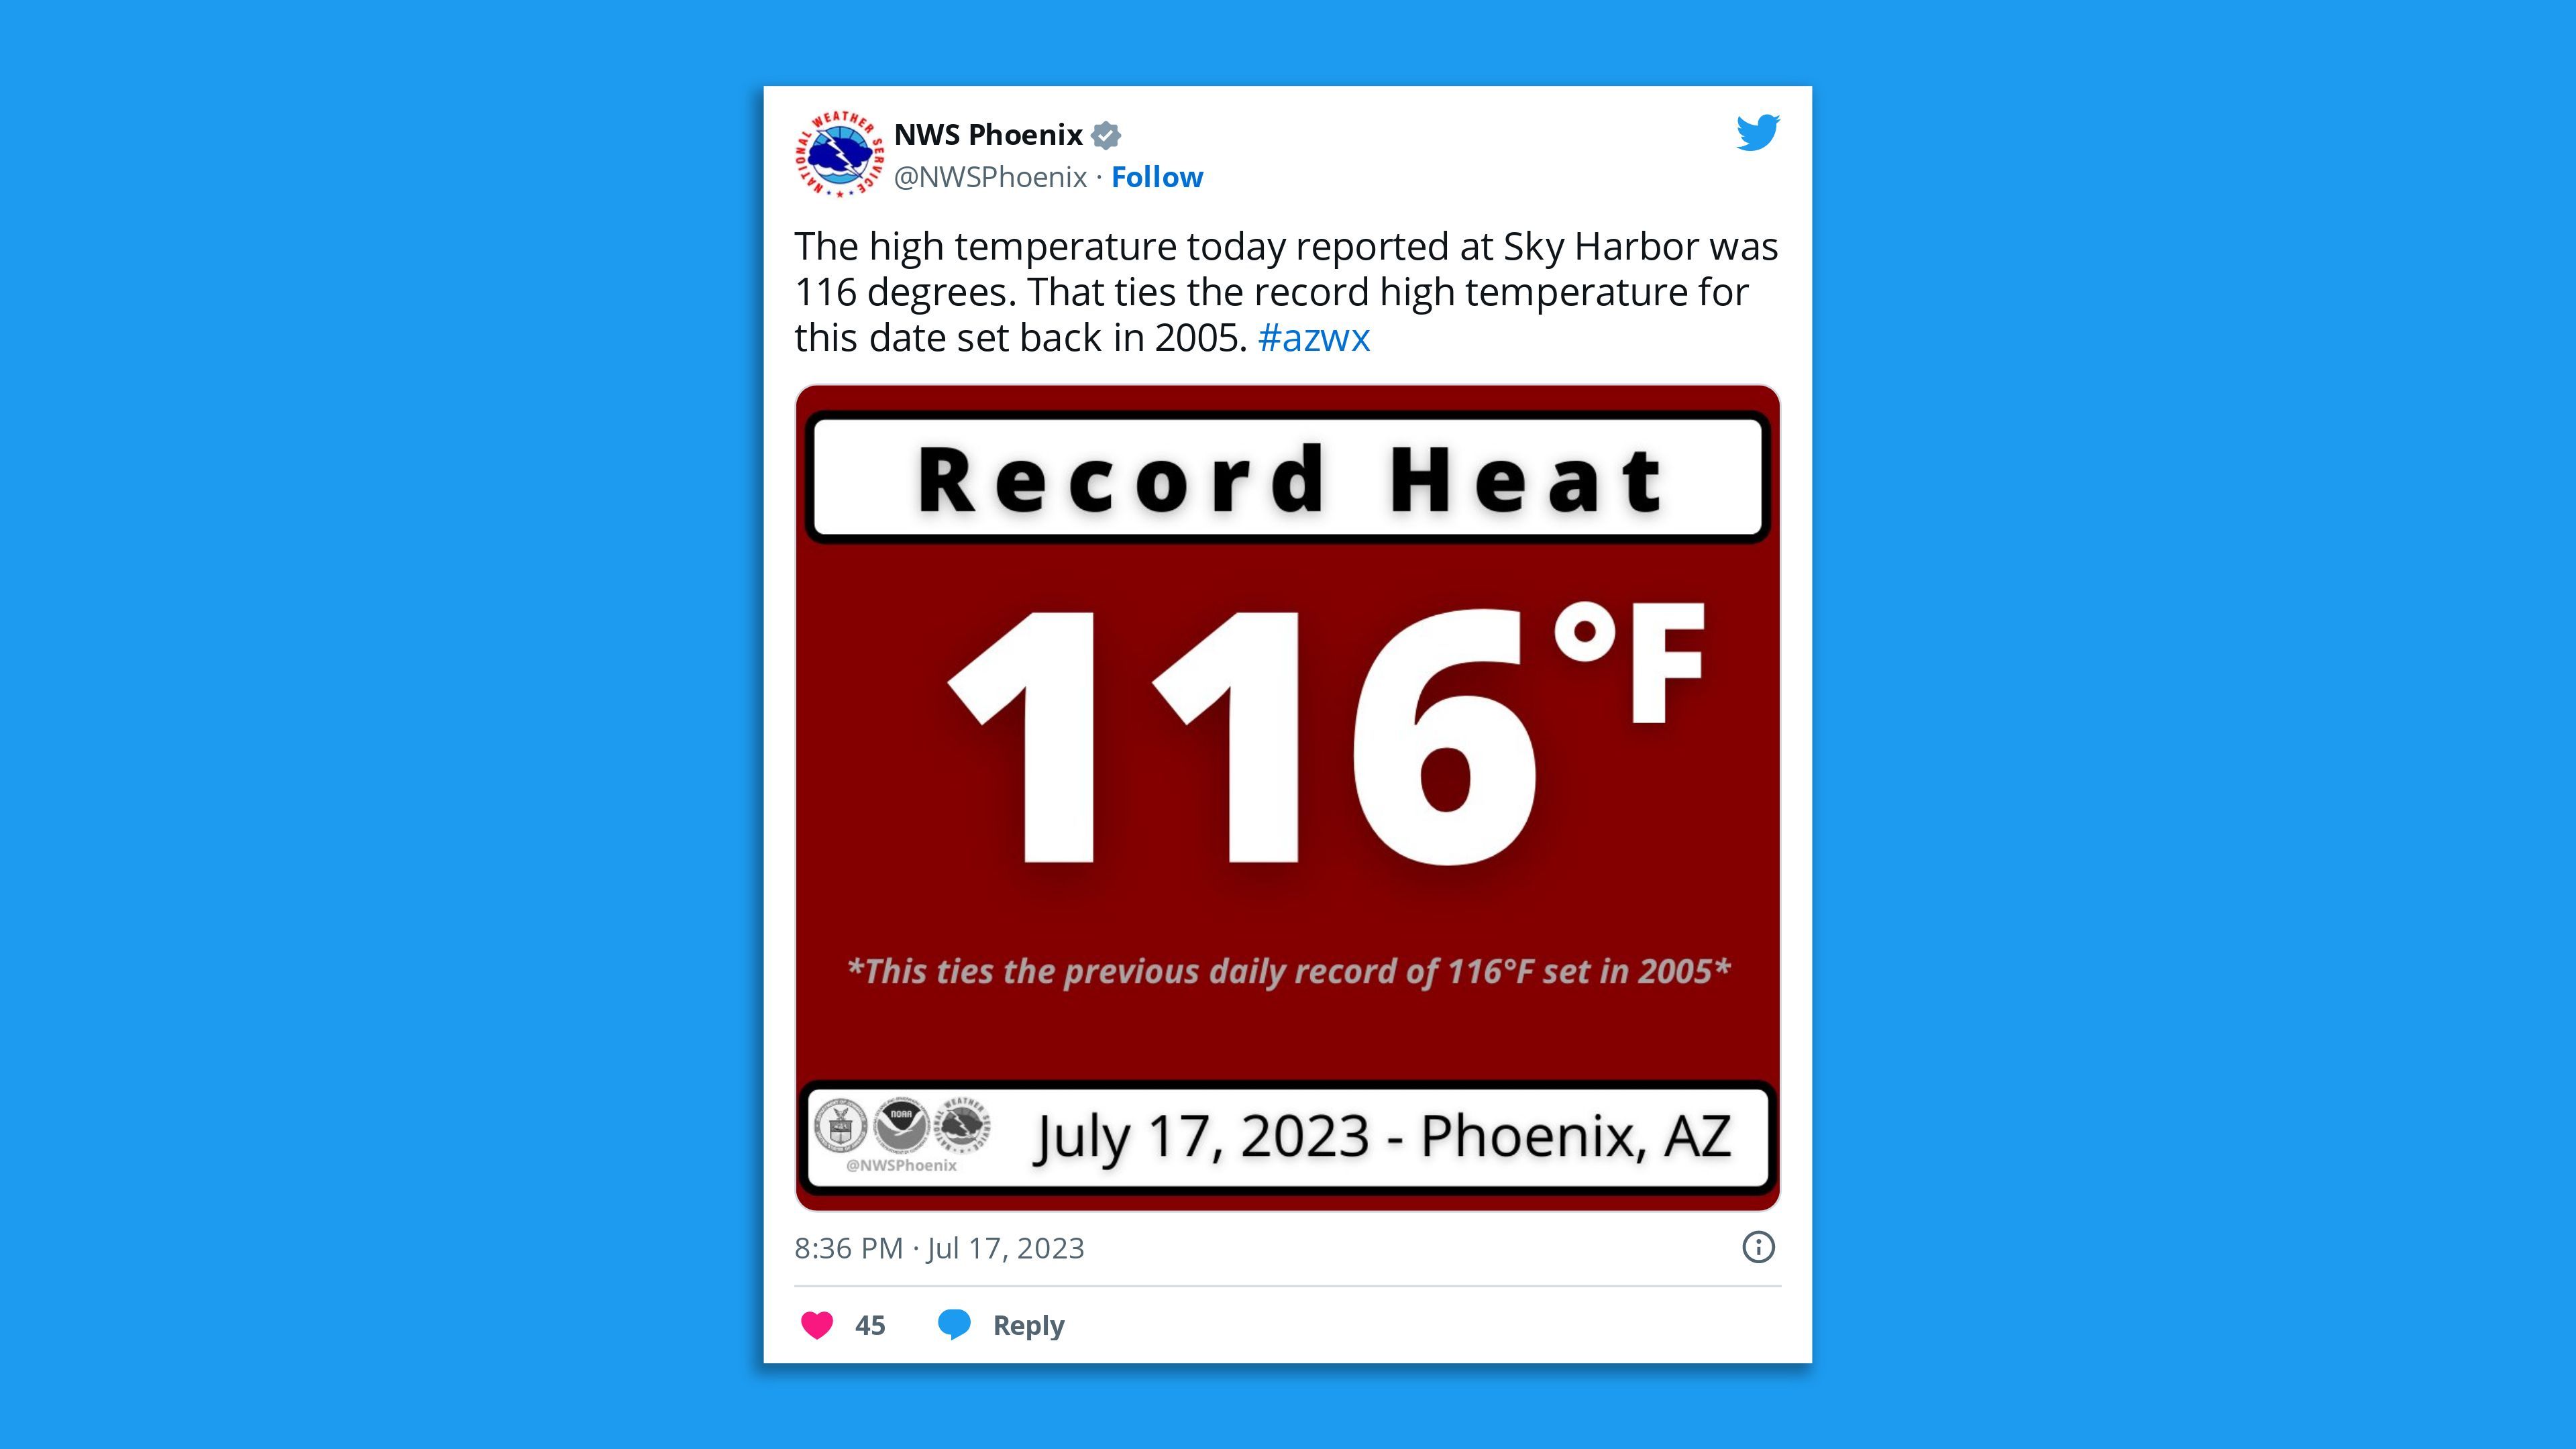 A screenshot of an NWS Phoenix tweet saying: "The high temperature today reported at Sky Harbor was 116 degrees. That ties the record high temperature for this date set back in 2005."